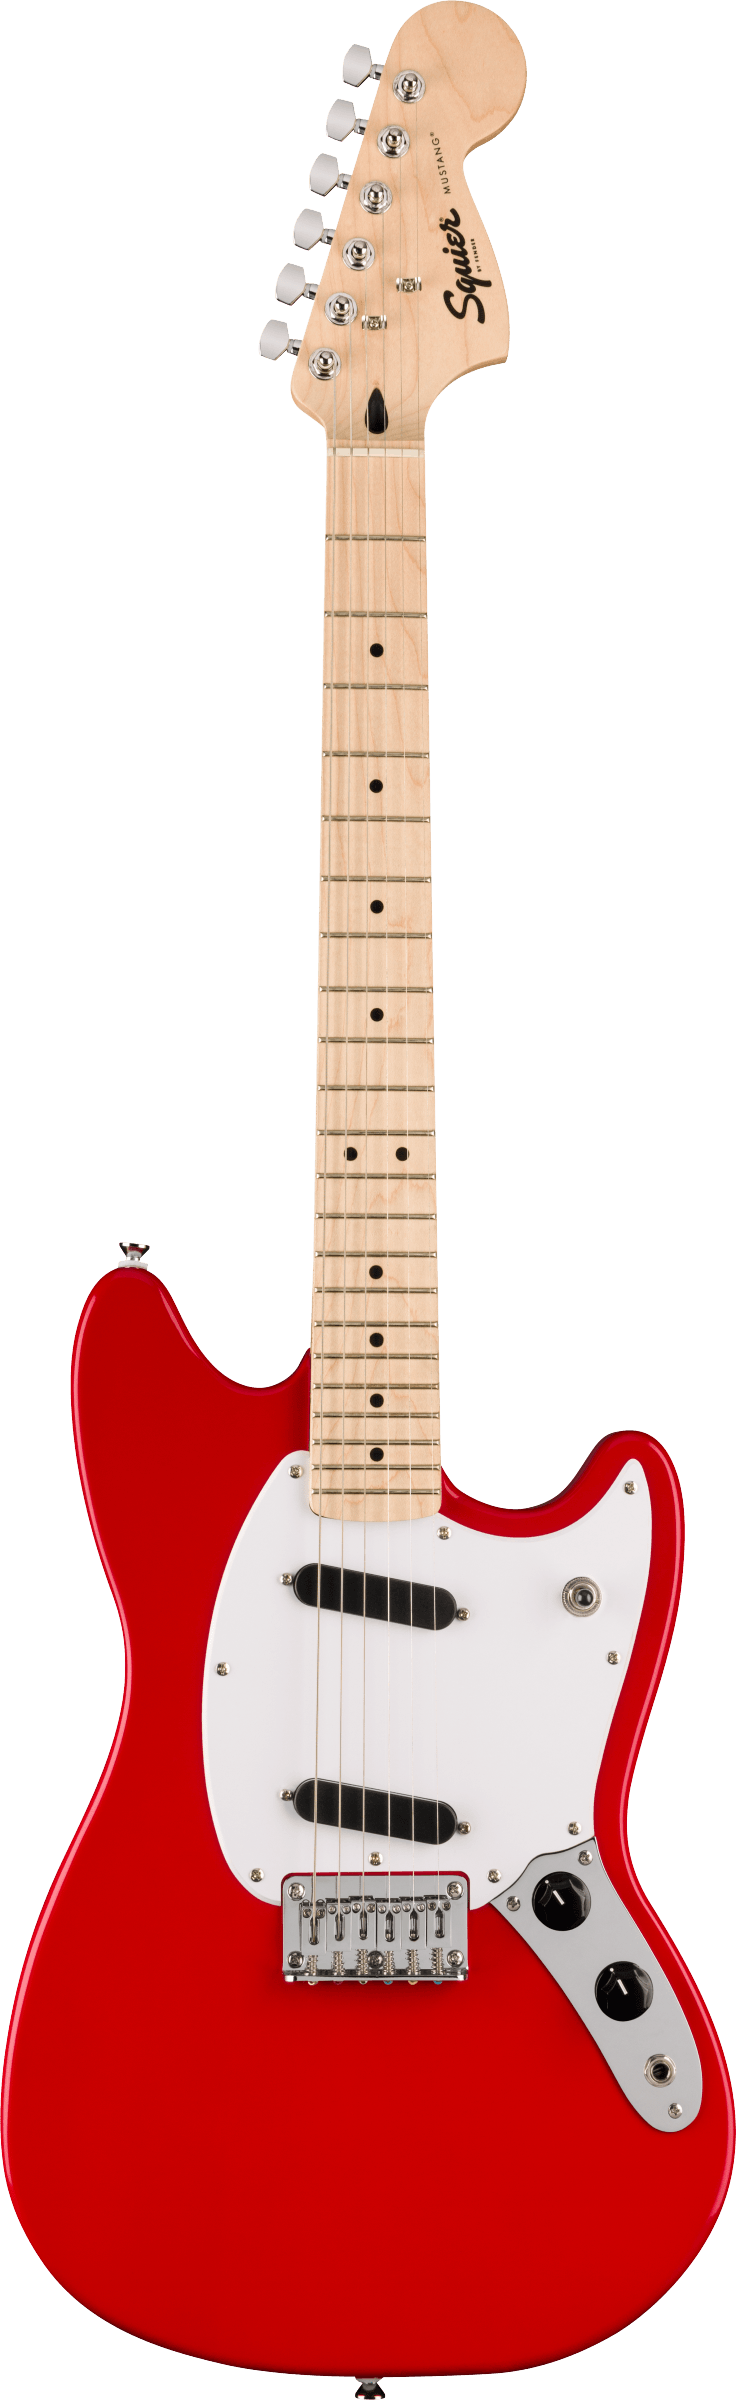 Squier Sonic Mustang Electric Guitar in Torino Red - Andertons Music Co.